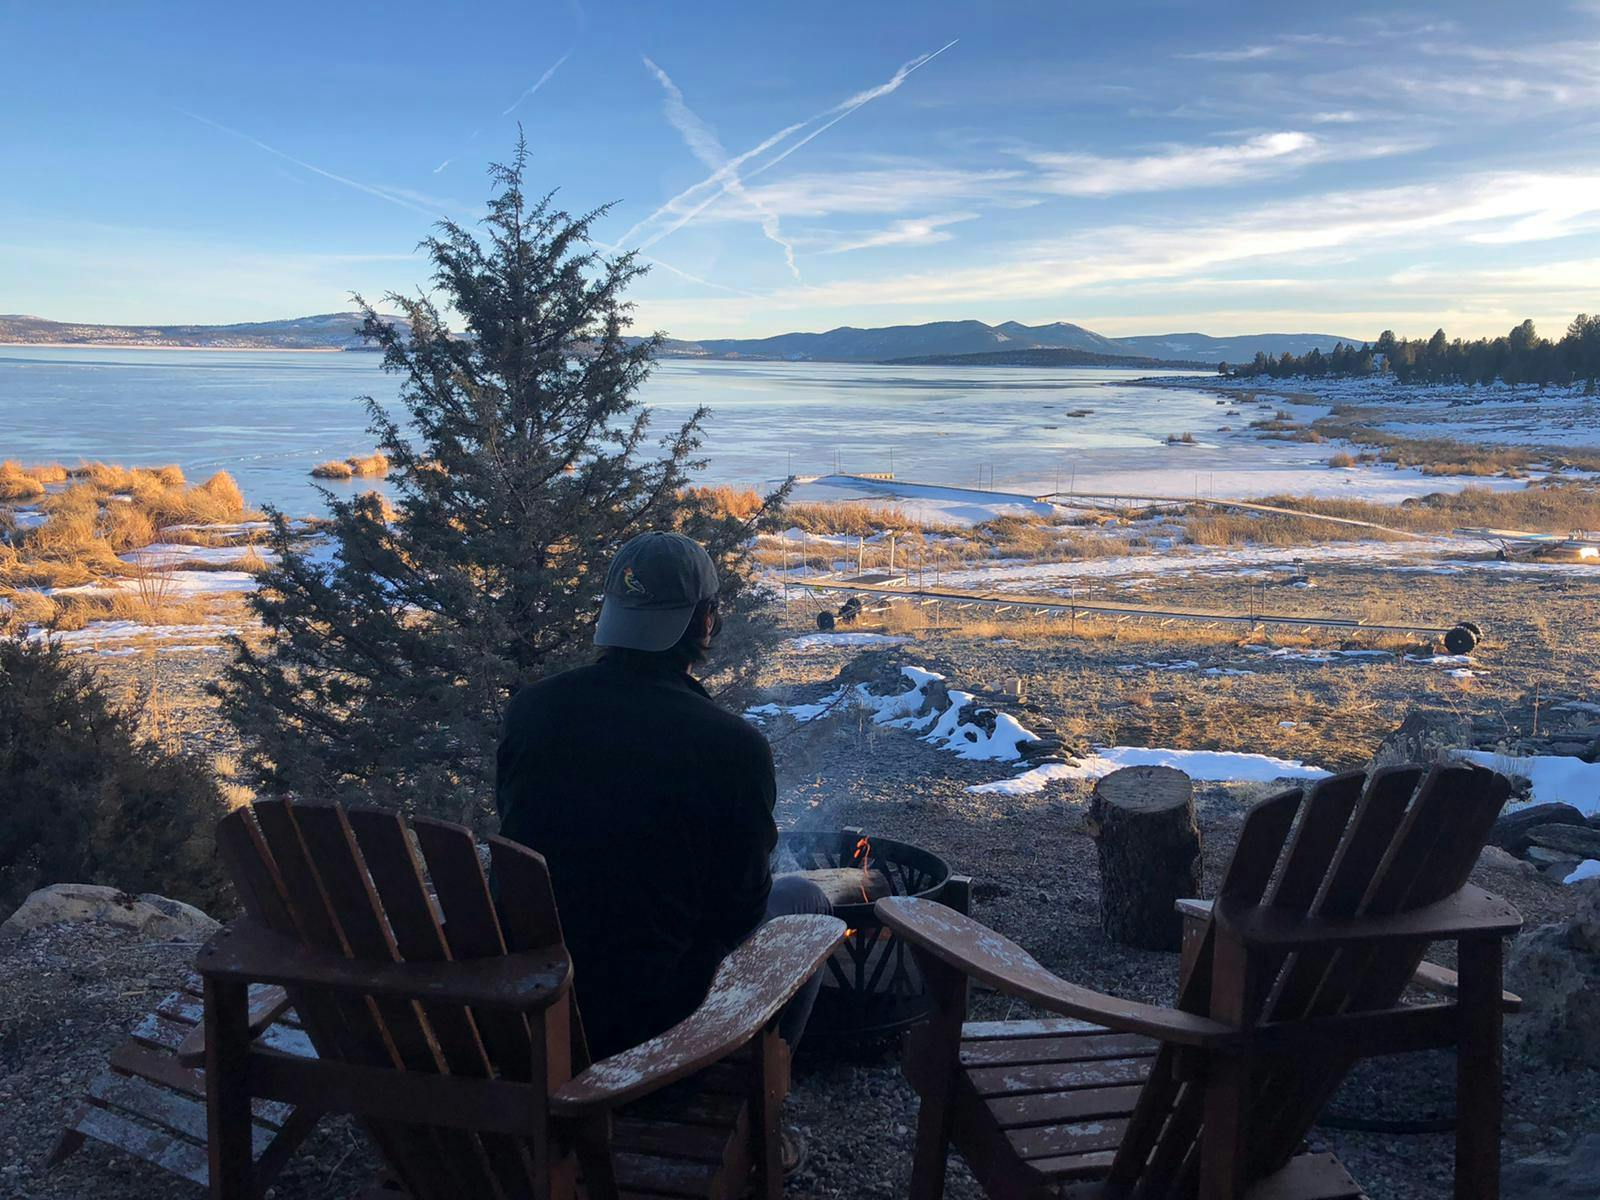 @strollinghome thinking deeply about crypto primitives in the morning at Eagle Lake